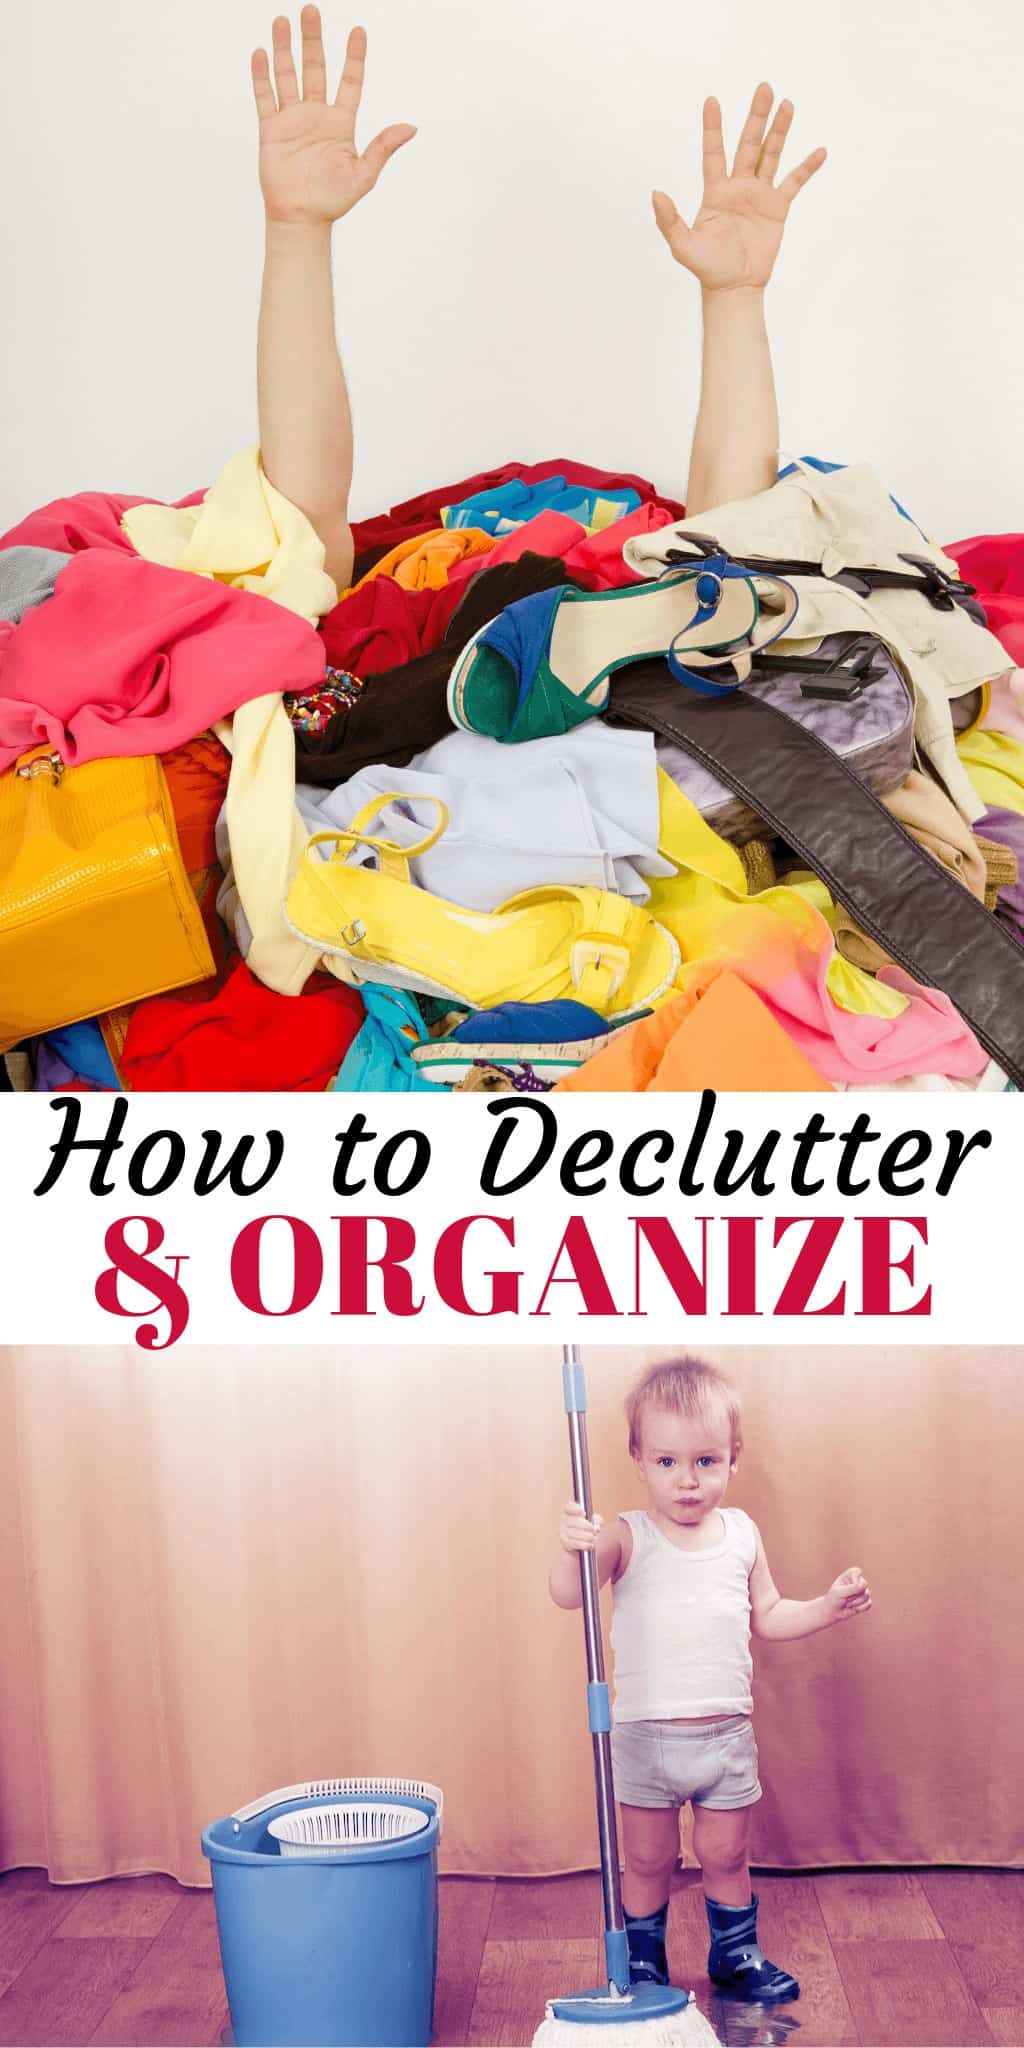 If you've decided to get a handle on your clutter, this article will offer some help with tips on how to de clutter and for maintaining your home afterward. #DineDreamDiscover #JustPlumCrazy #RV #FullTimeRV #TravelBlogger #Travel #GoRVing #TinyLiving #Declutter #ClutterFree #LifeInTheRV